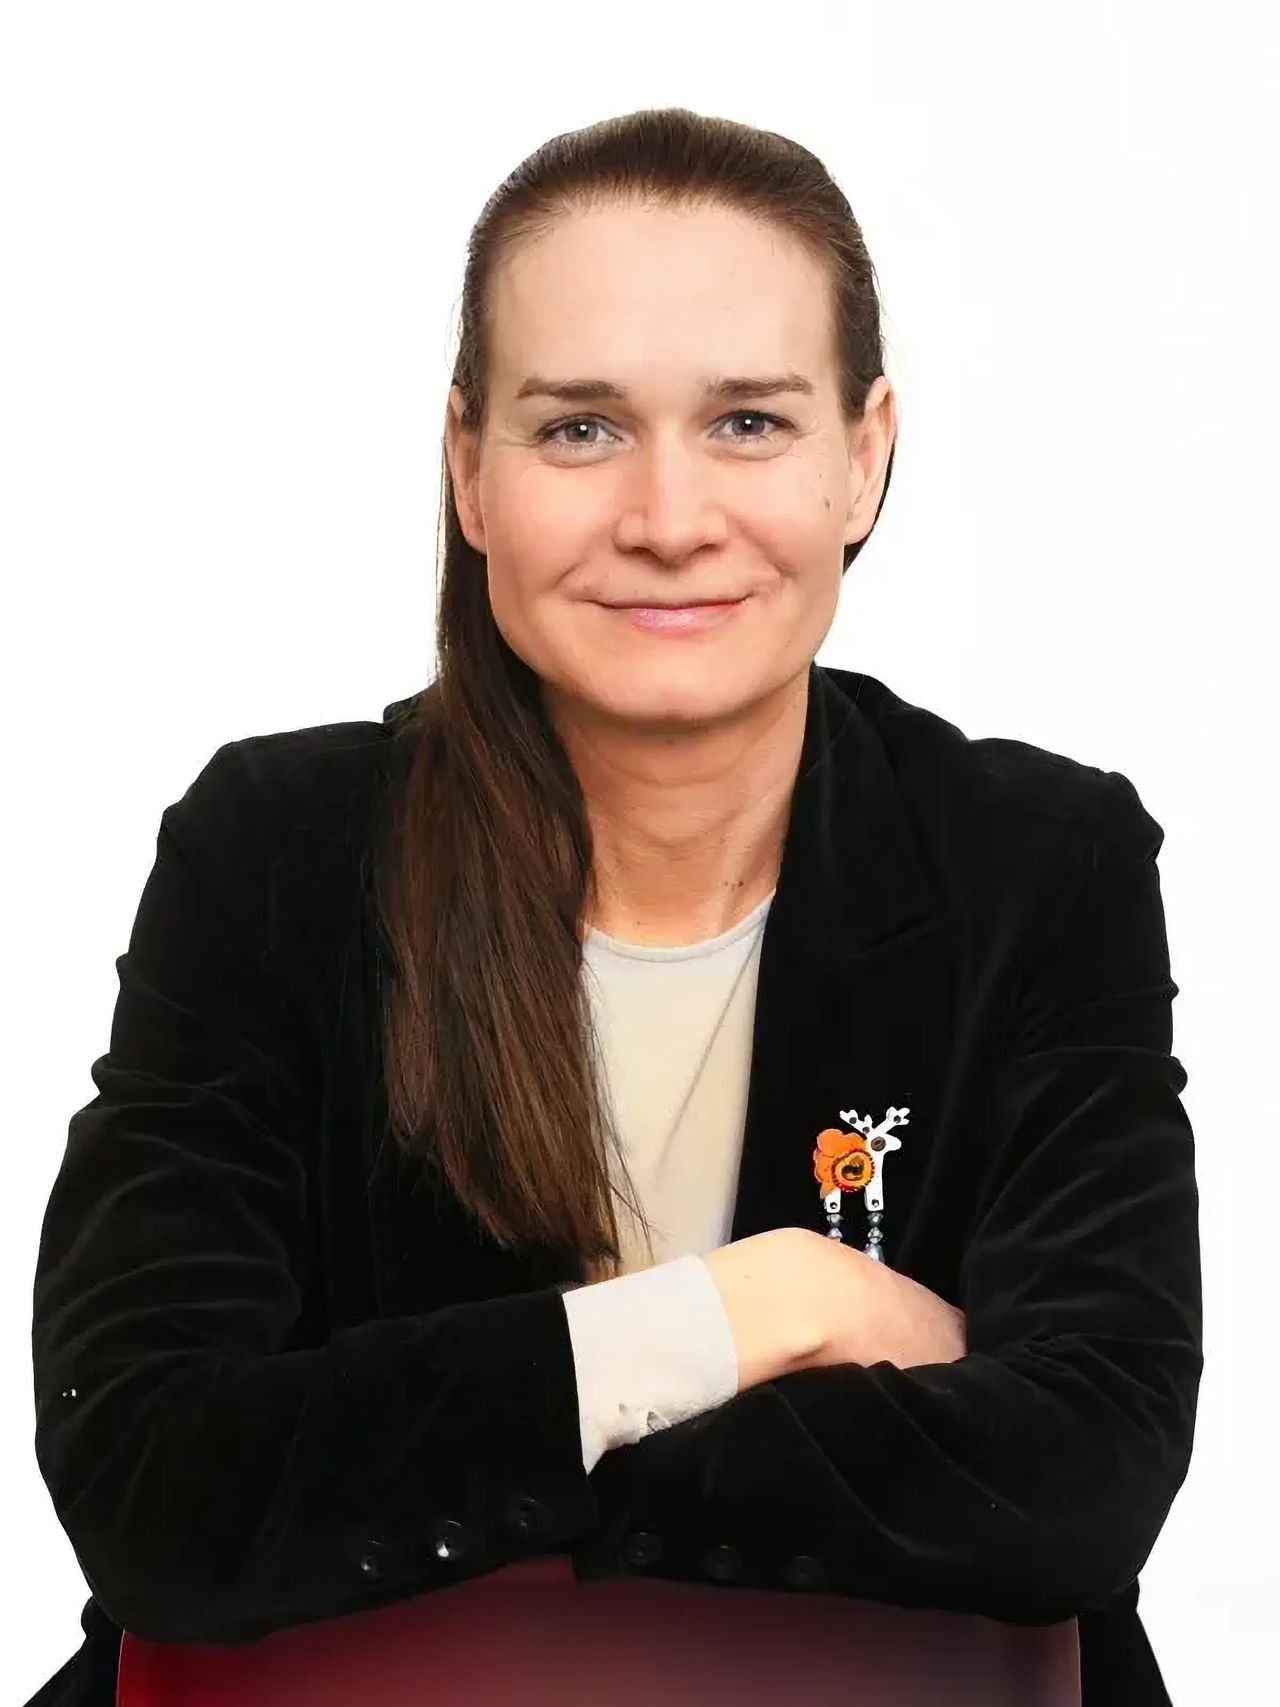 <h3>Nina Bosnićová</h3><p>Head of Bilateral and Multilateral Programmes Unit of DZS - Czech National Agency for International Cooperation and Research </p><p><br /></p><p>Nina Bosnićová earned her MA in English and Slovak Philology from Masaryk University in Brno and obtained her Ph.D. in English and American Literature from Charles University in Prague. Before her tenure at the Czech National Agency for International Education and Research, she dedicated nine years to various roles within the nonprofit organization Gender Studies. Currently, she leads the unit responsible for bilateral and multilateral programmes there. </p>